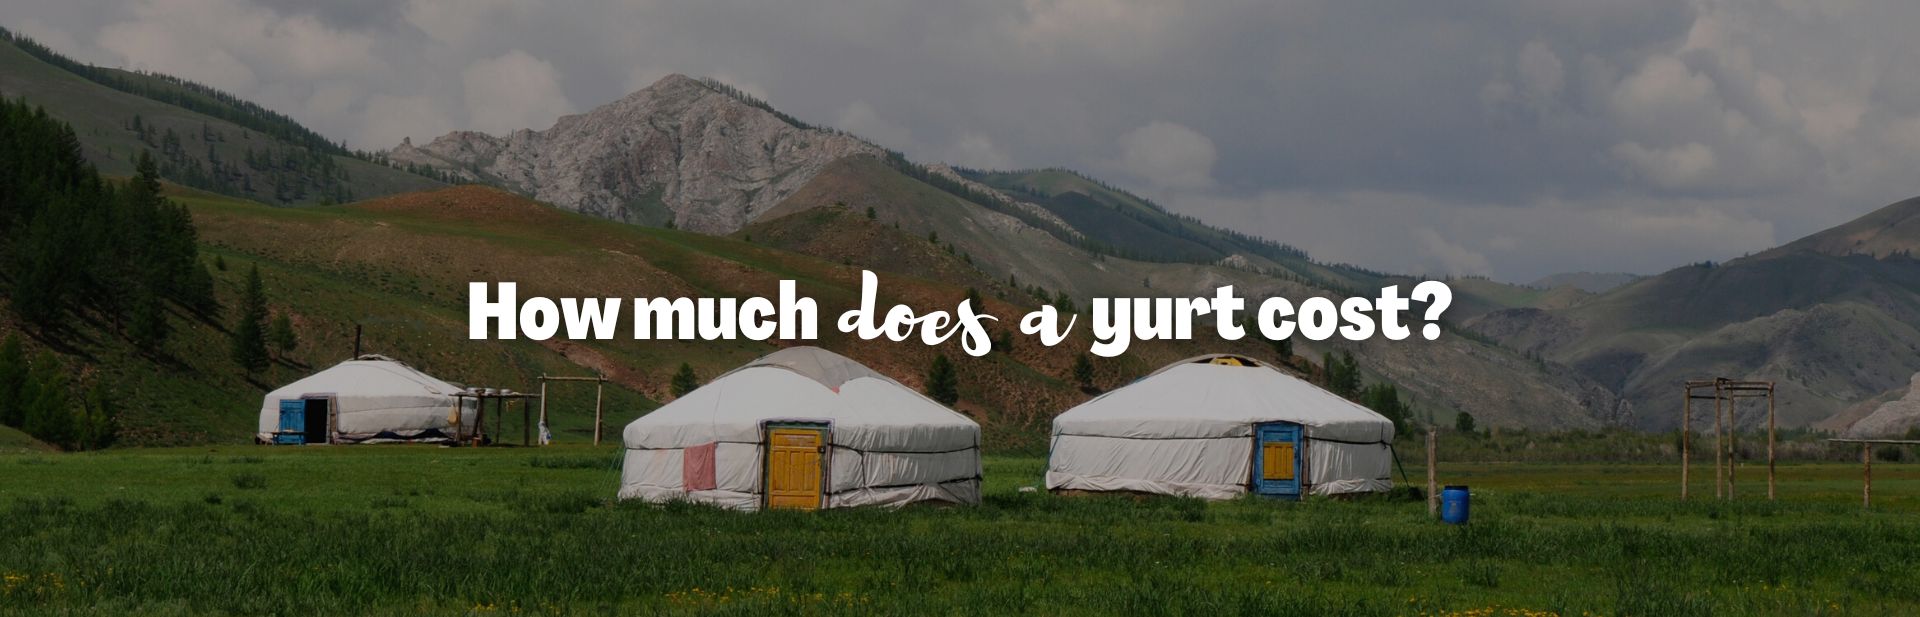 How Much Does a Yurt Cost? Understanding the Price of Buying, Building, Maintaining and Living in a Yurt